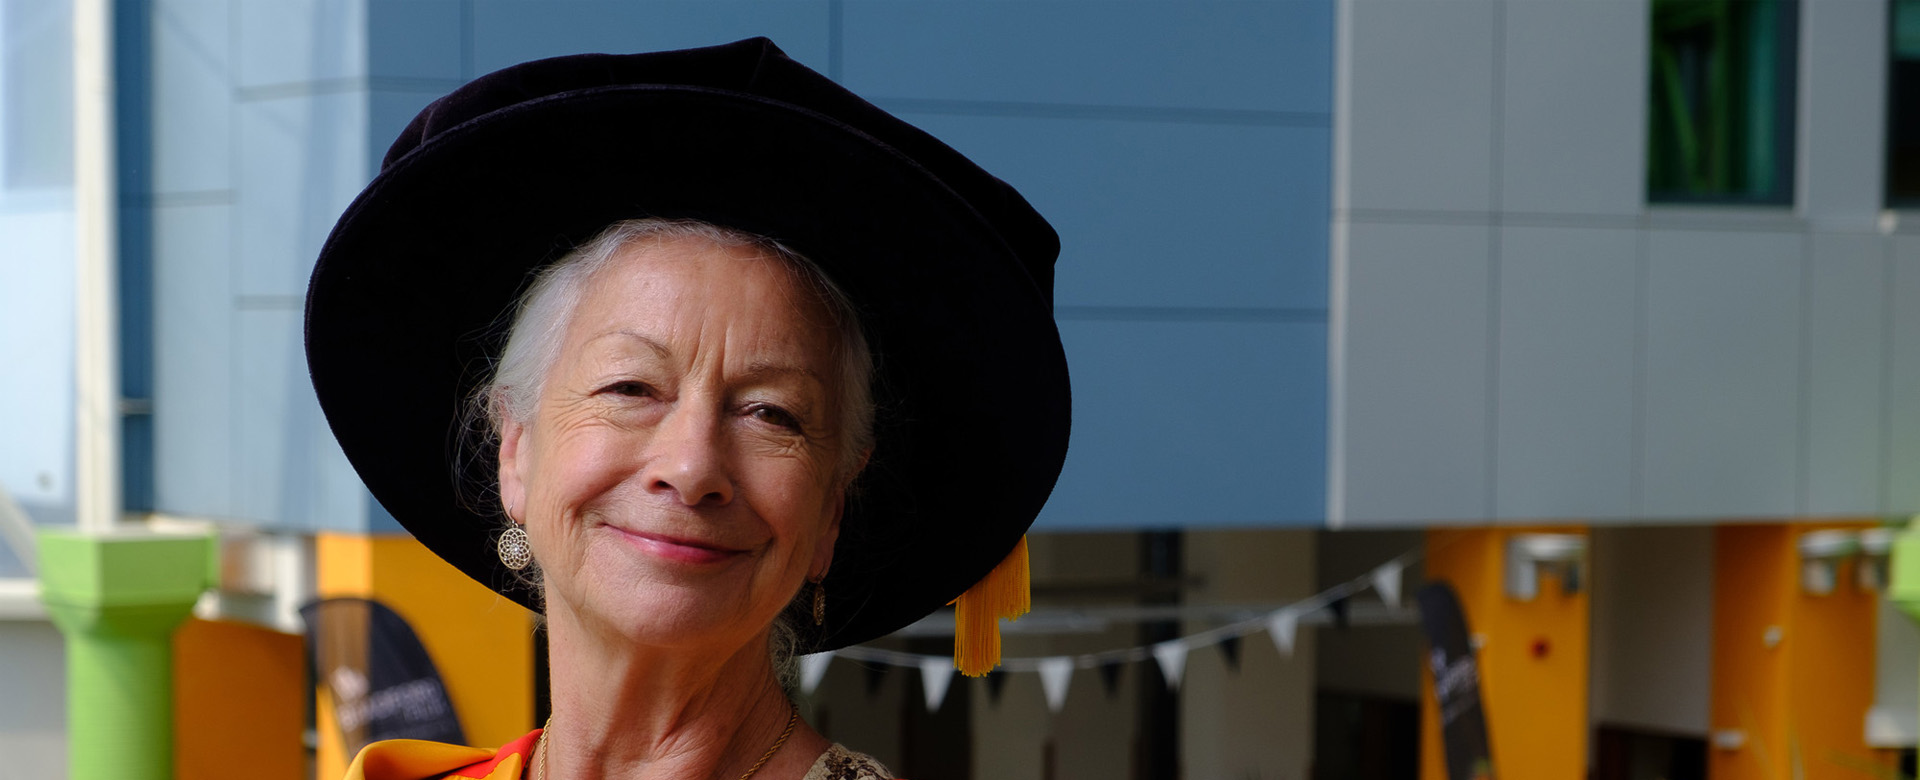 Dr Scillia Elworthy wearing her honorary graduate gown and hat while posing in the atrium of the Richmond Building.